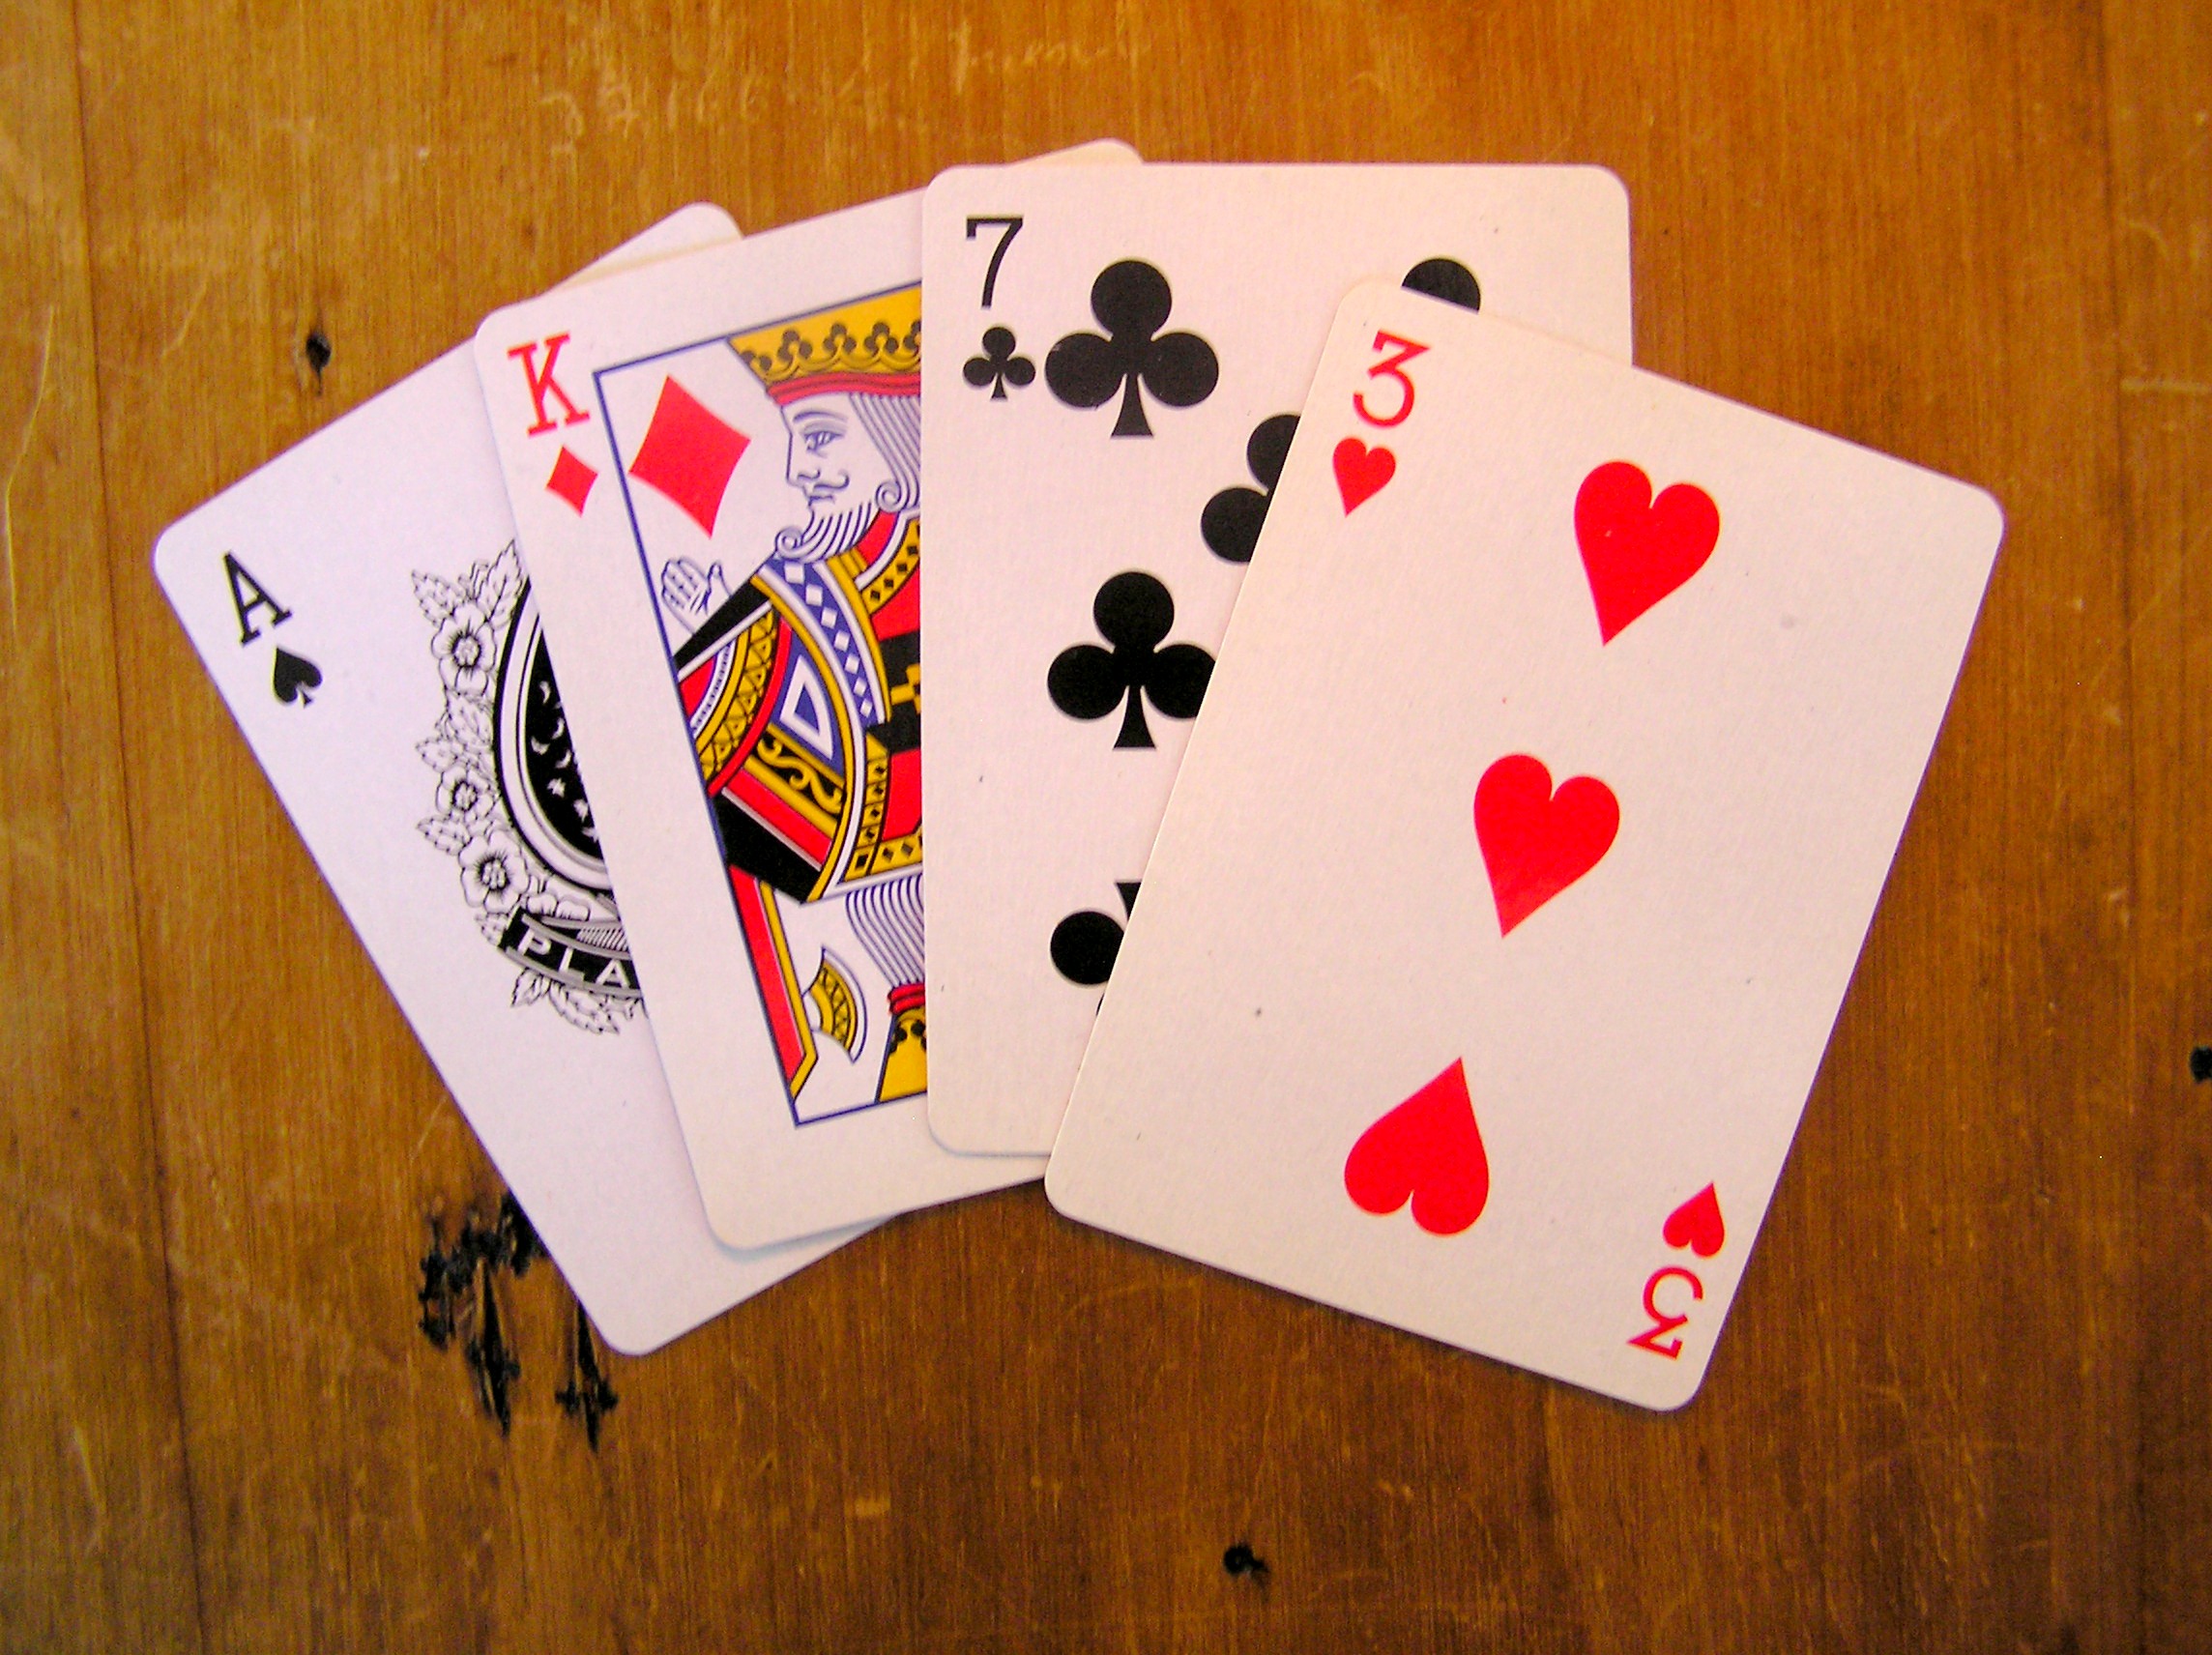 What Are The 4 Suits In A Deck Of Cards